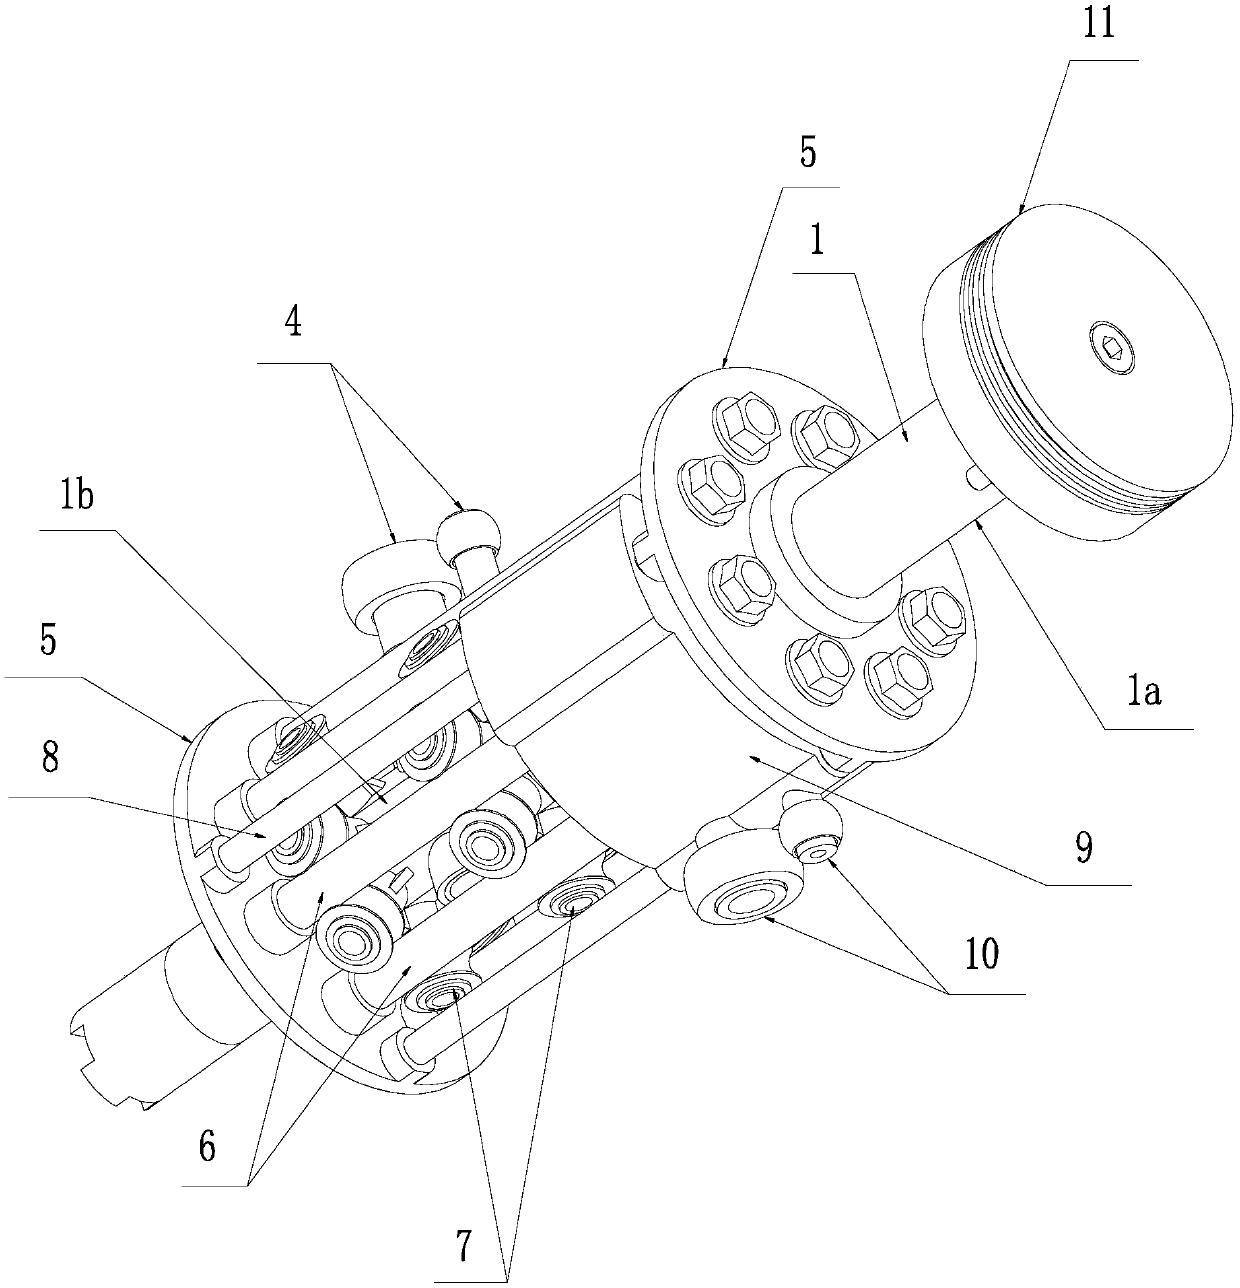 Engine efficient axial rotation driving mechanism